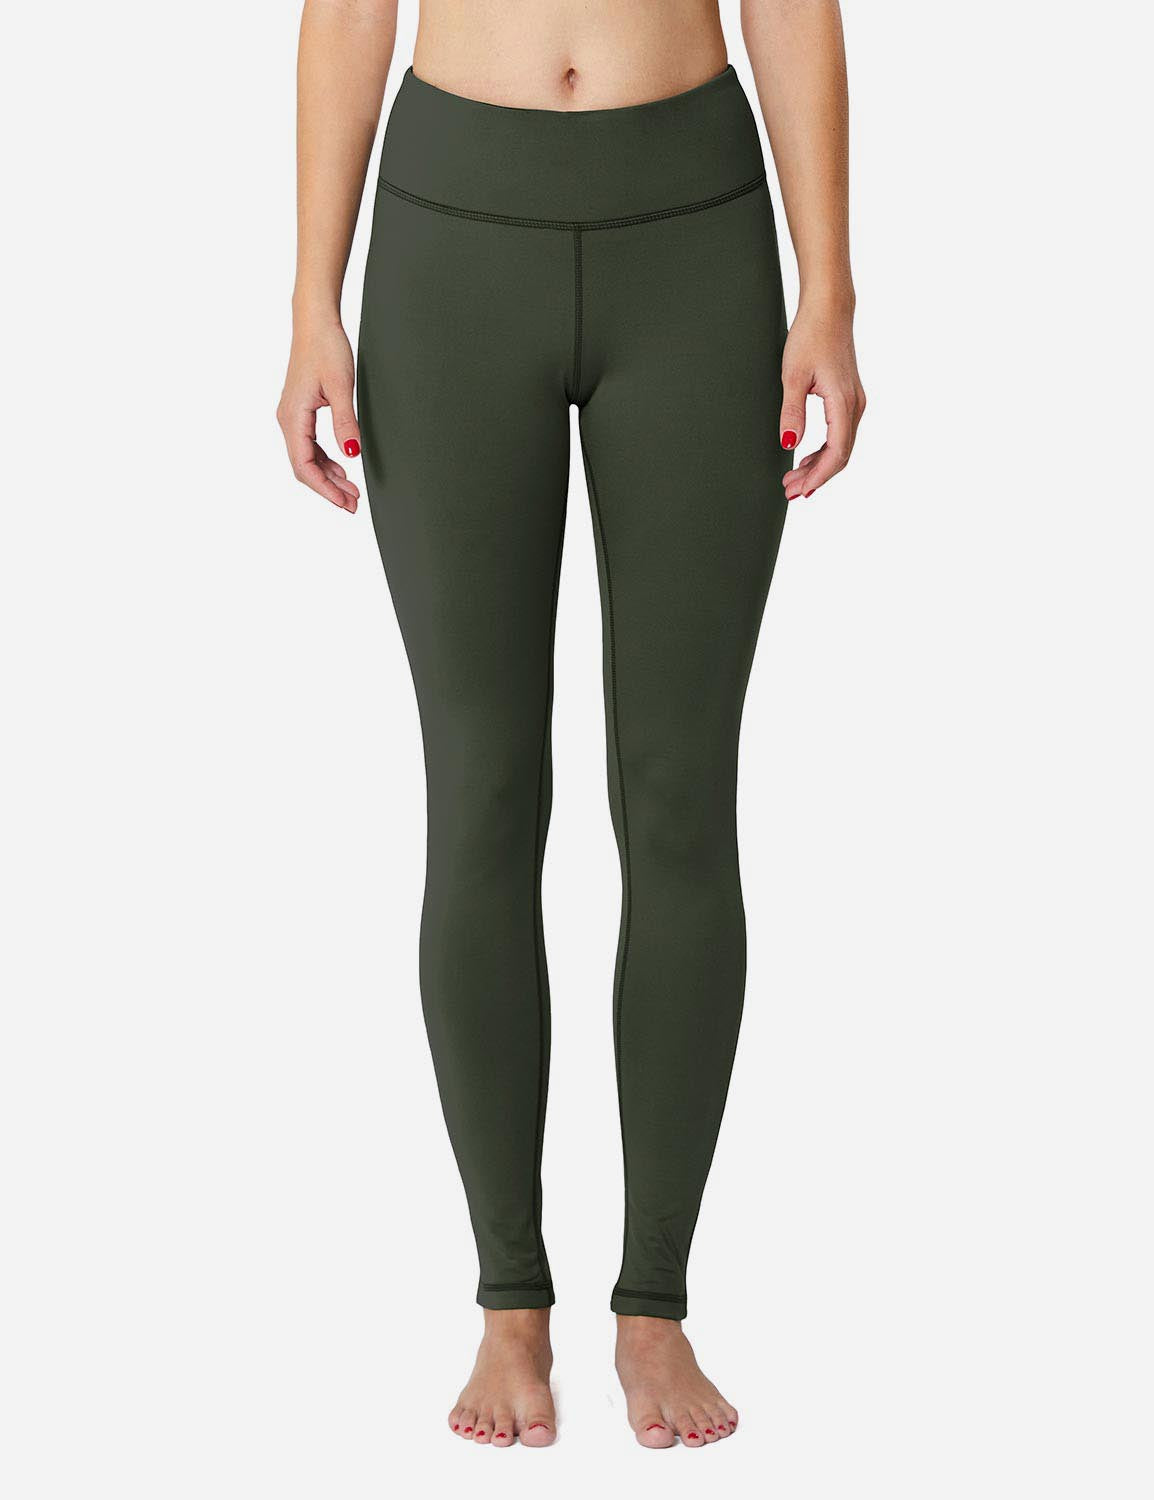 Baleaf Women's Mid-Rise Fleece Lined Basic Yoga & Workout Leggings abh018 Army-Green Front